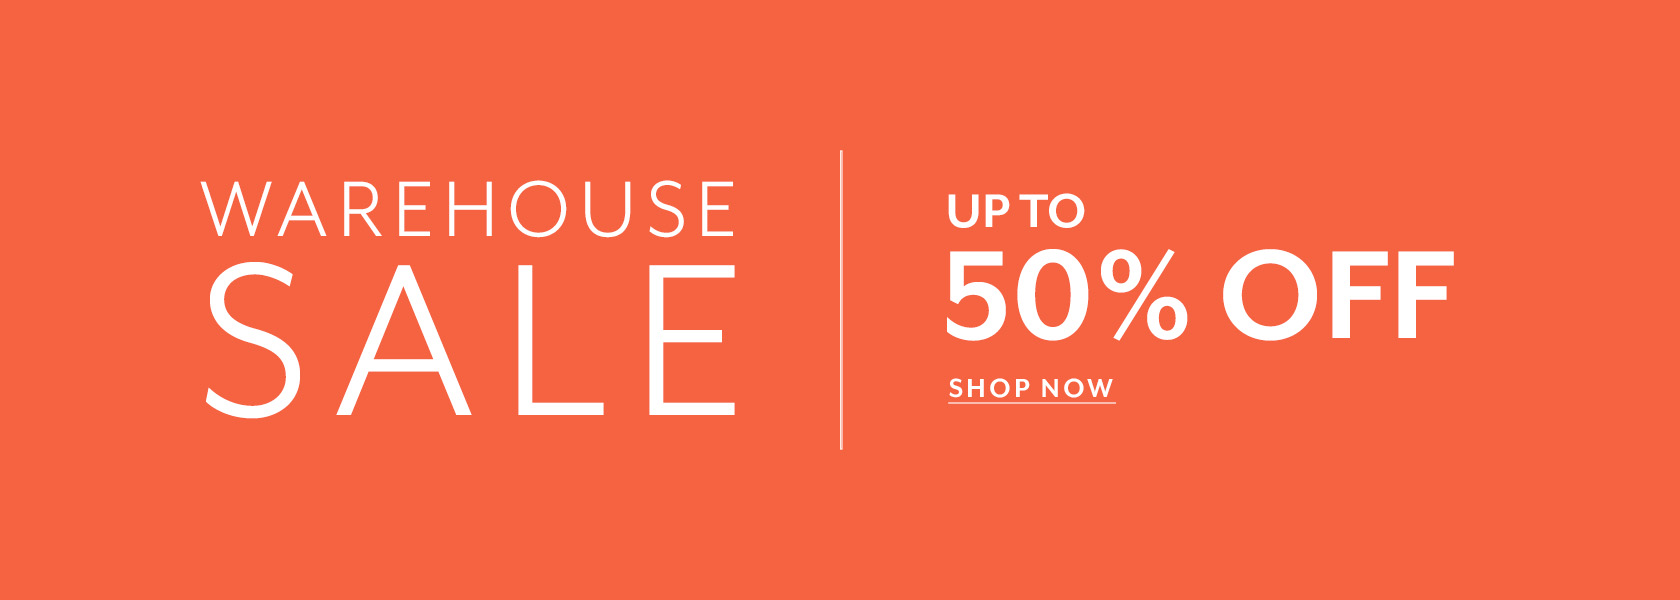 Warehouse Sale up to 50% off. Shop Now.